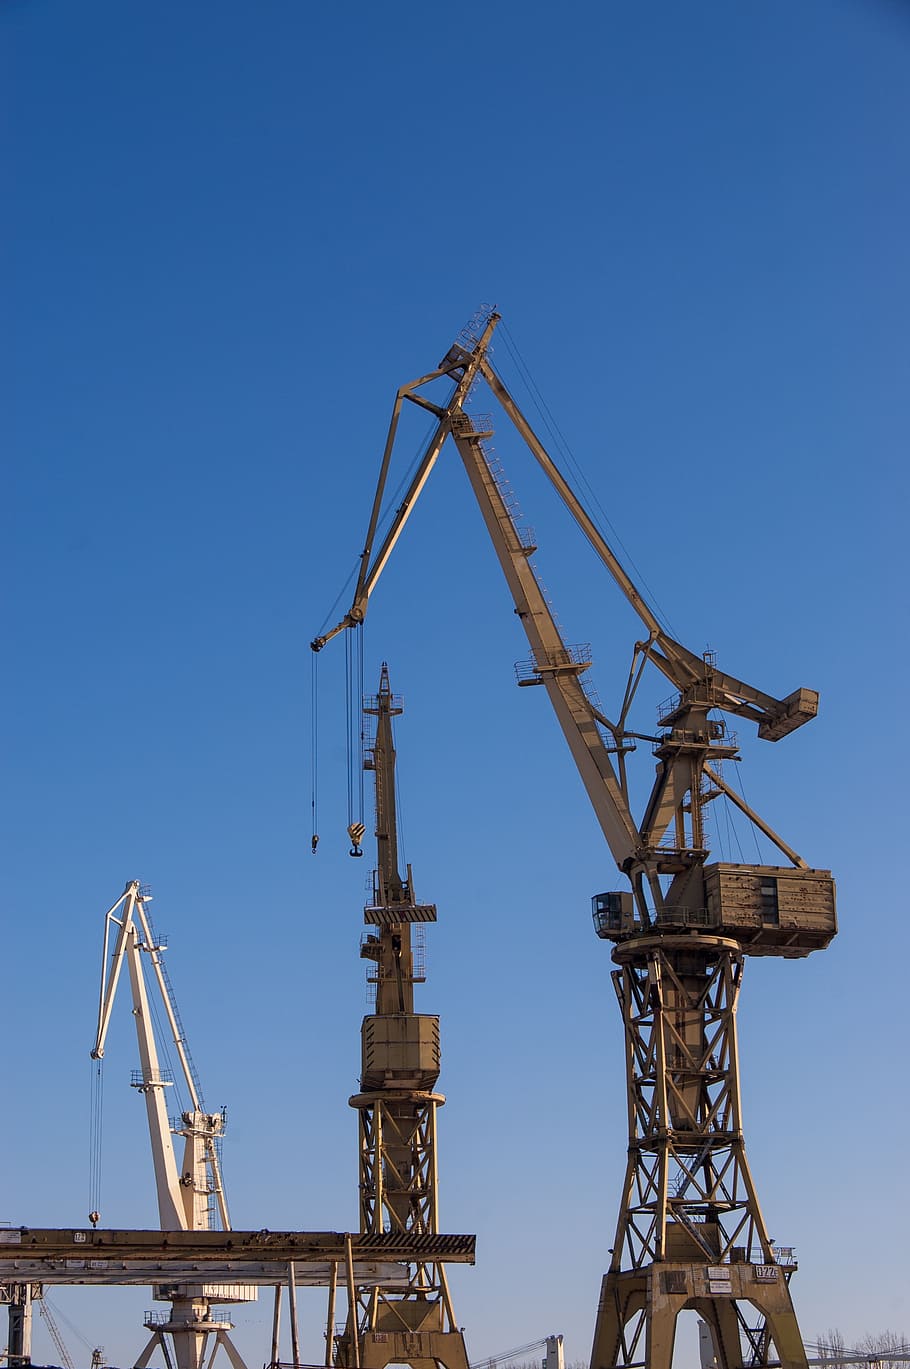 white, metal towers, clear, blue, sky, daytime, baltic, build, construction, crane